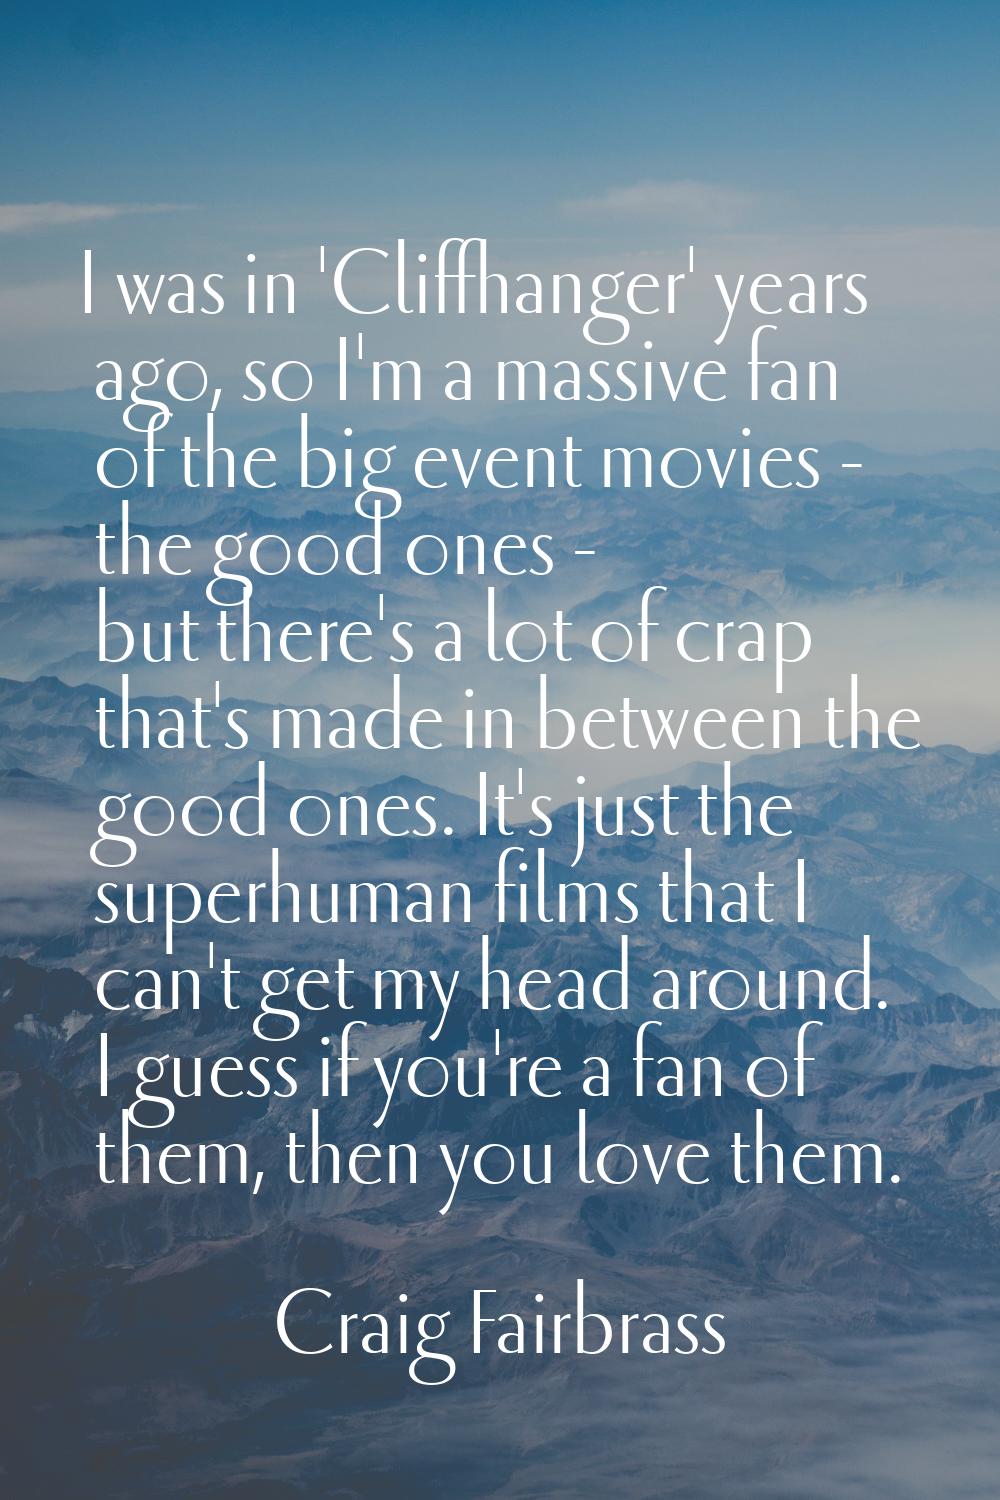 I was in 'Cliffhanger' years ago, so I'm a massive fan of the big event movies - the good ones - bu